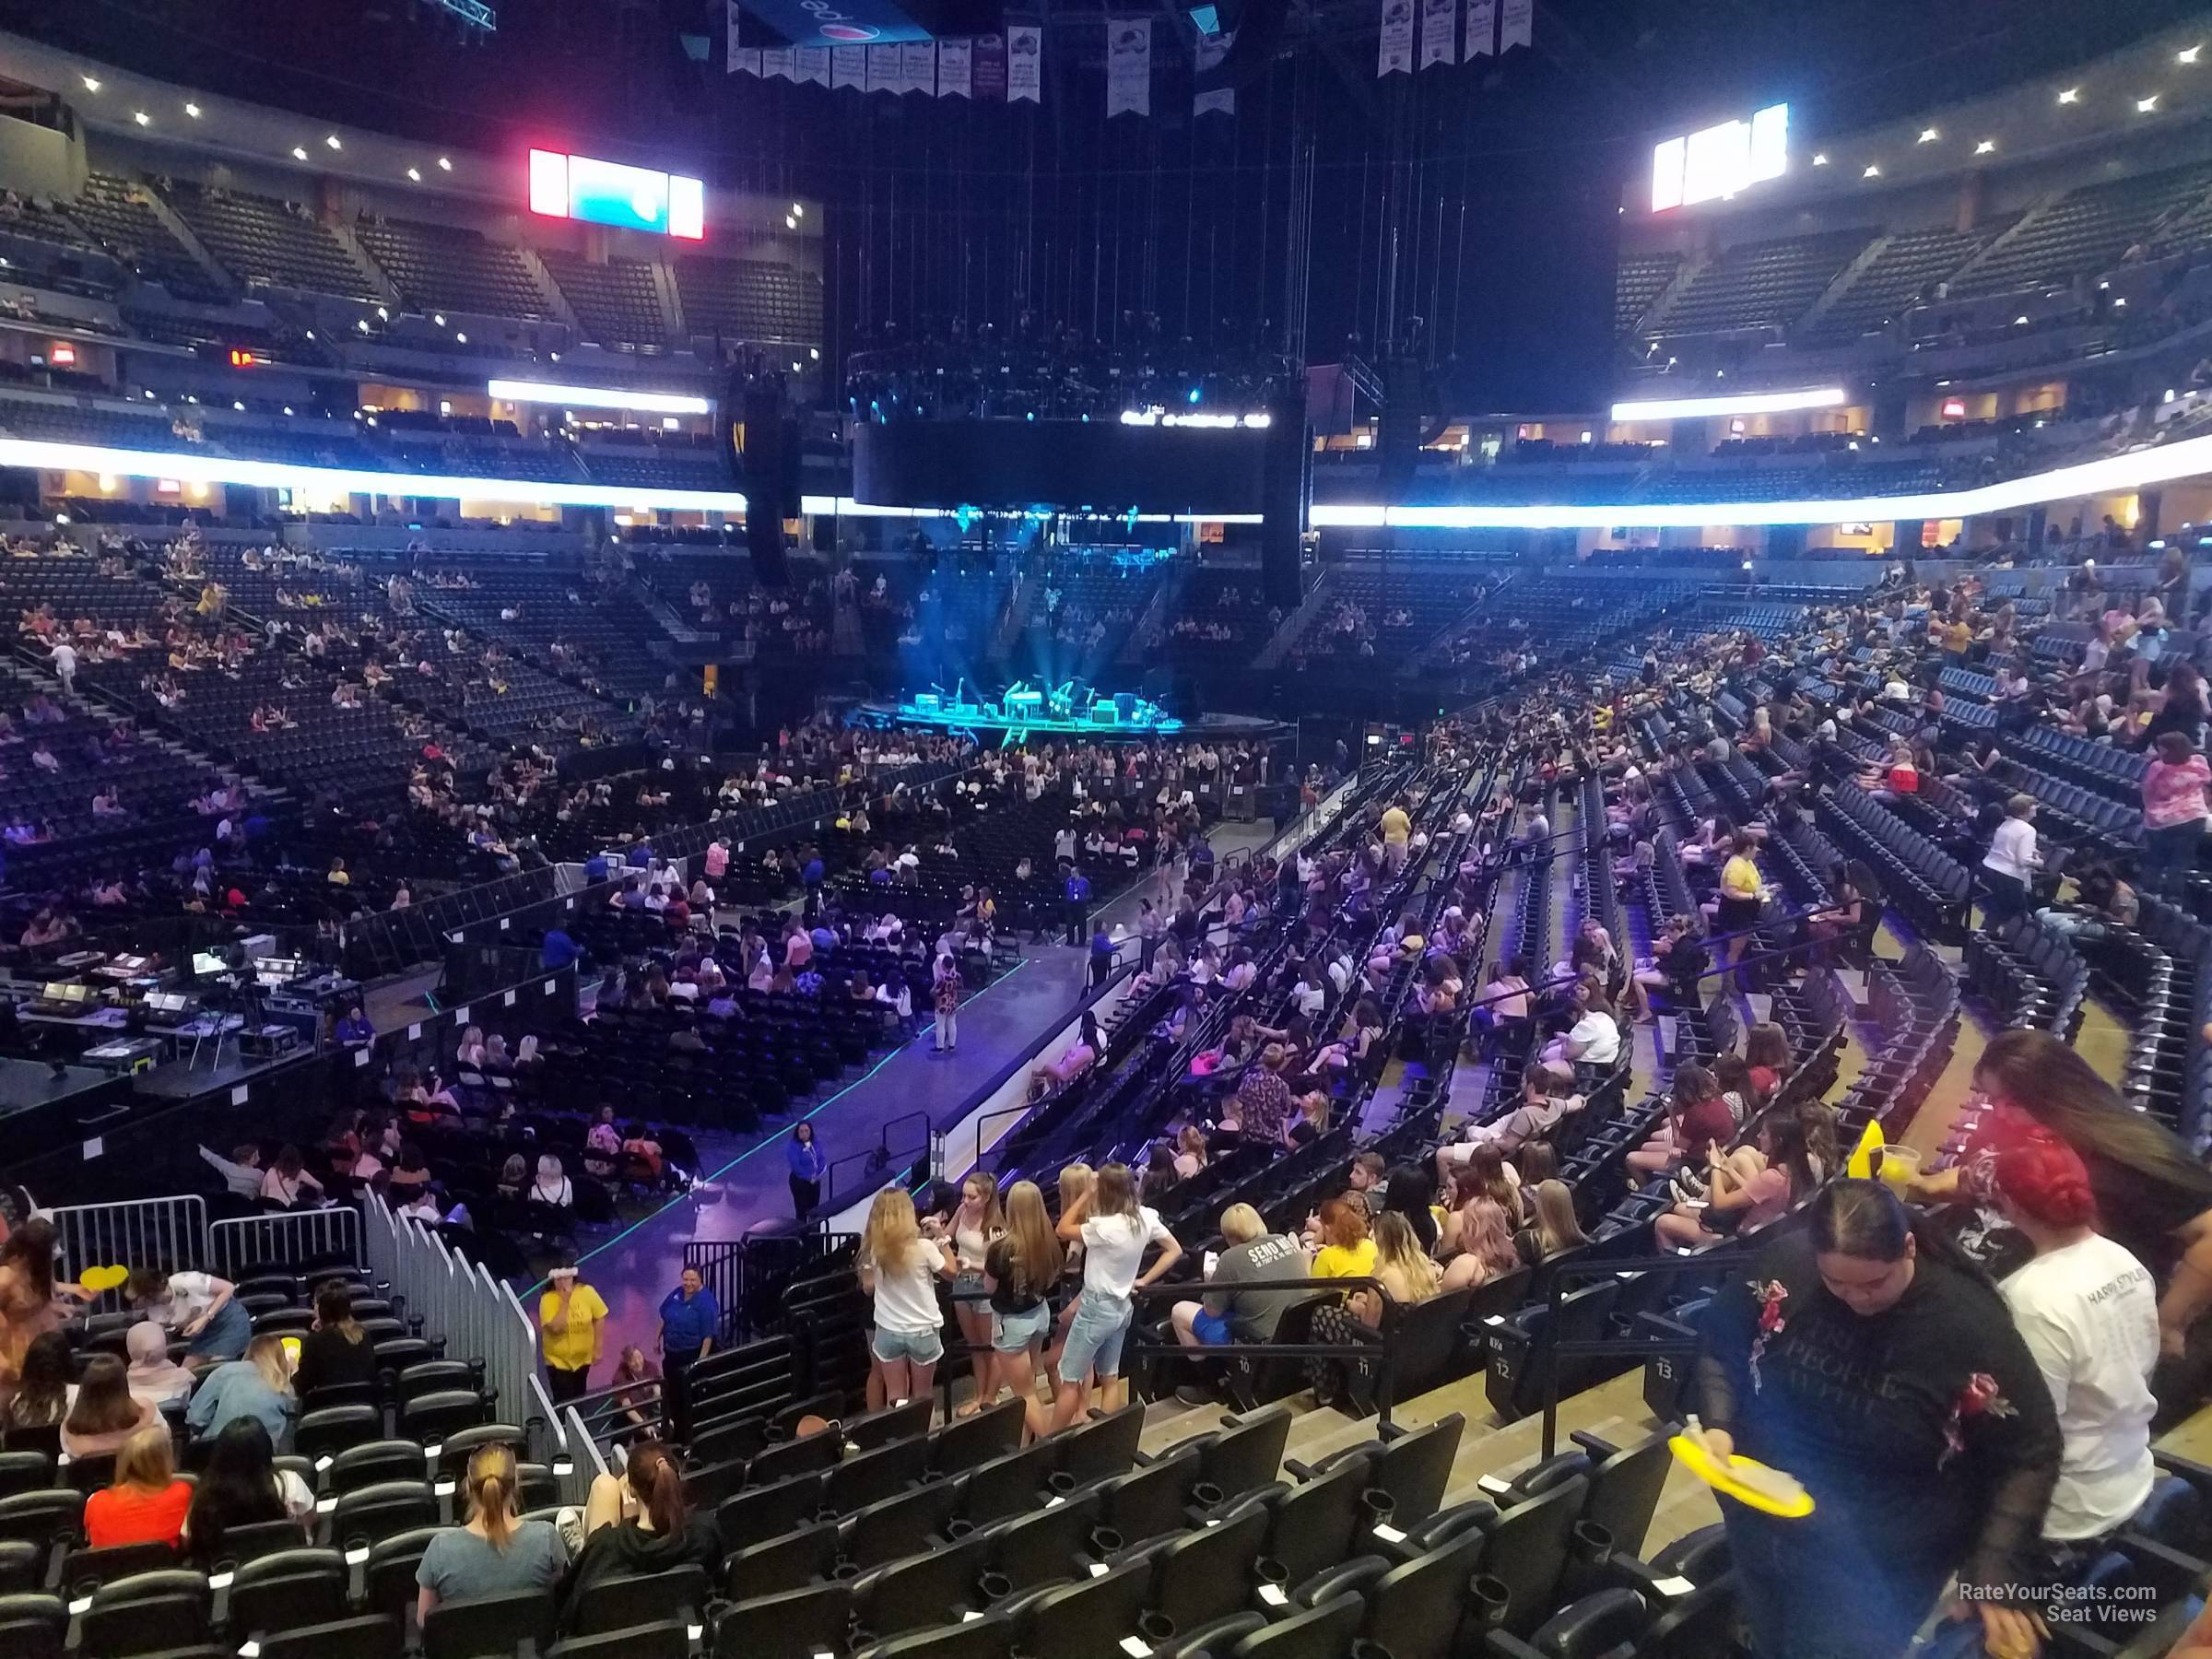 section 108, row 19 seat view  for concert - ball arena